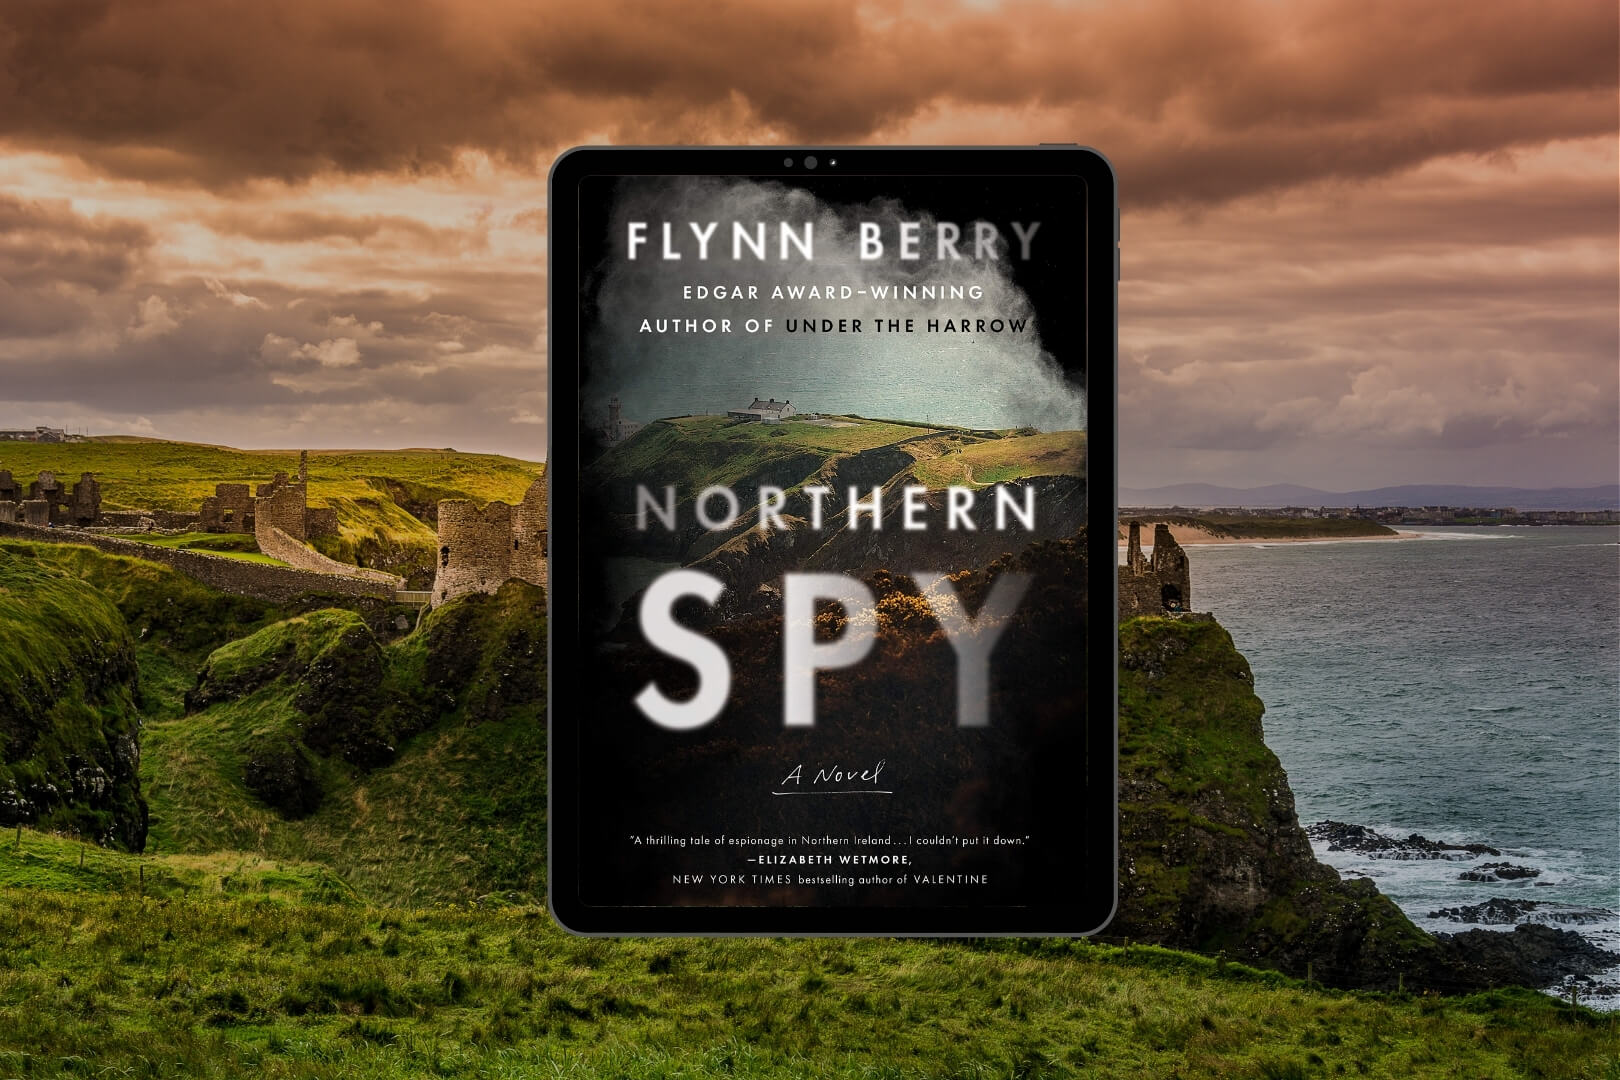 Book Club Questions for Northern Spy by Flynn Berry